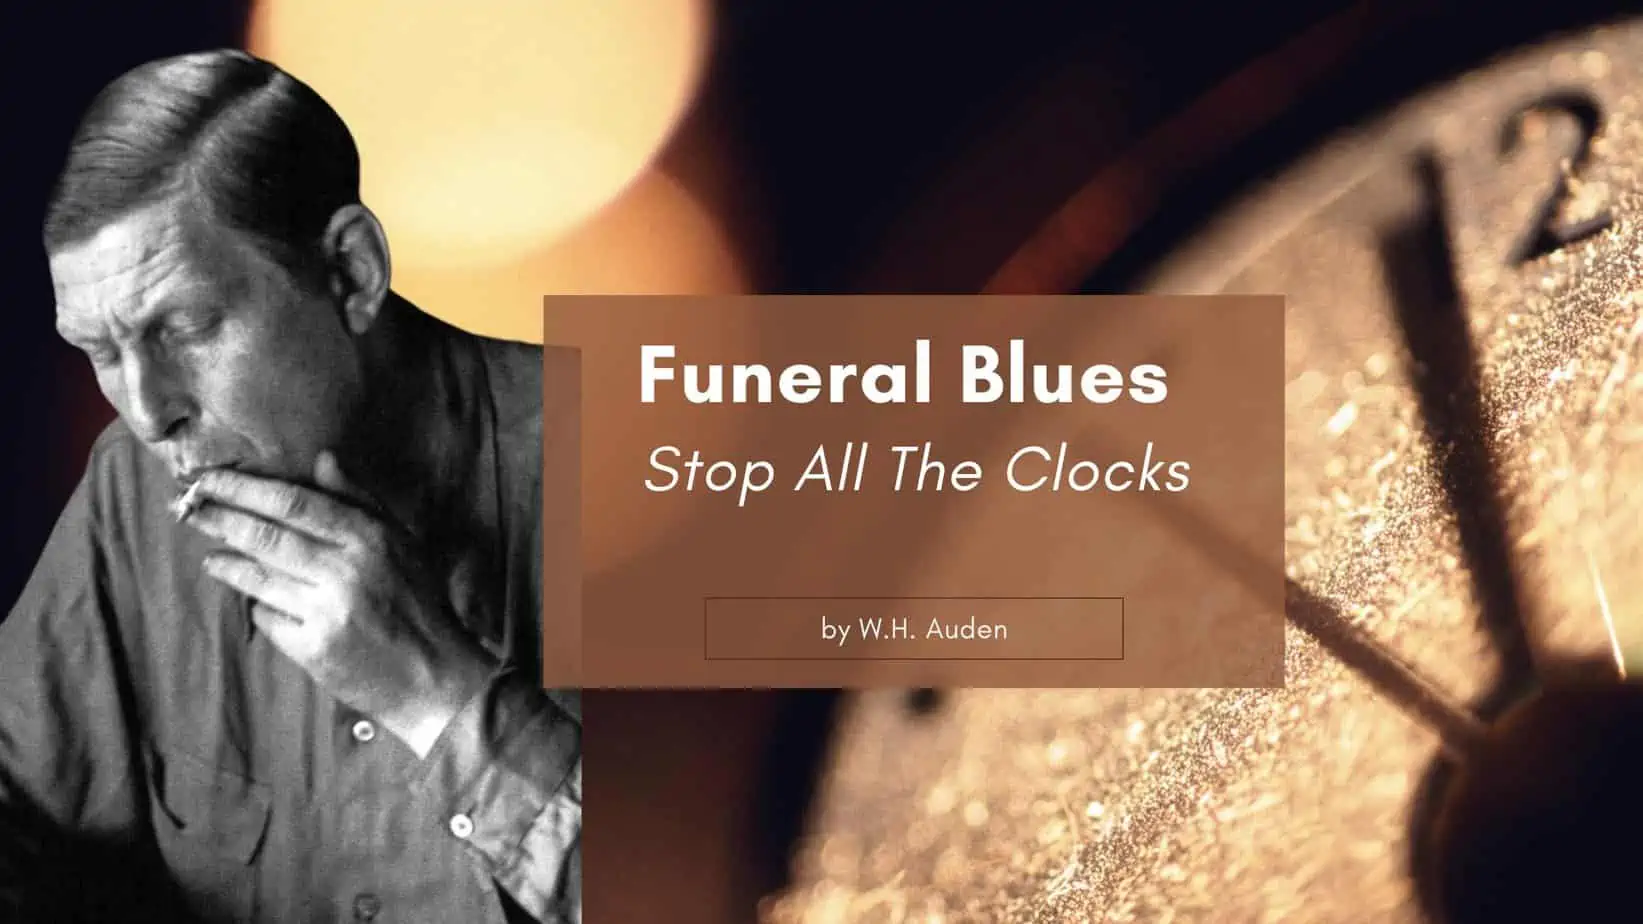 Funeral Blues - Stop All The Clocks